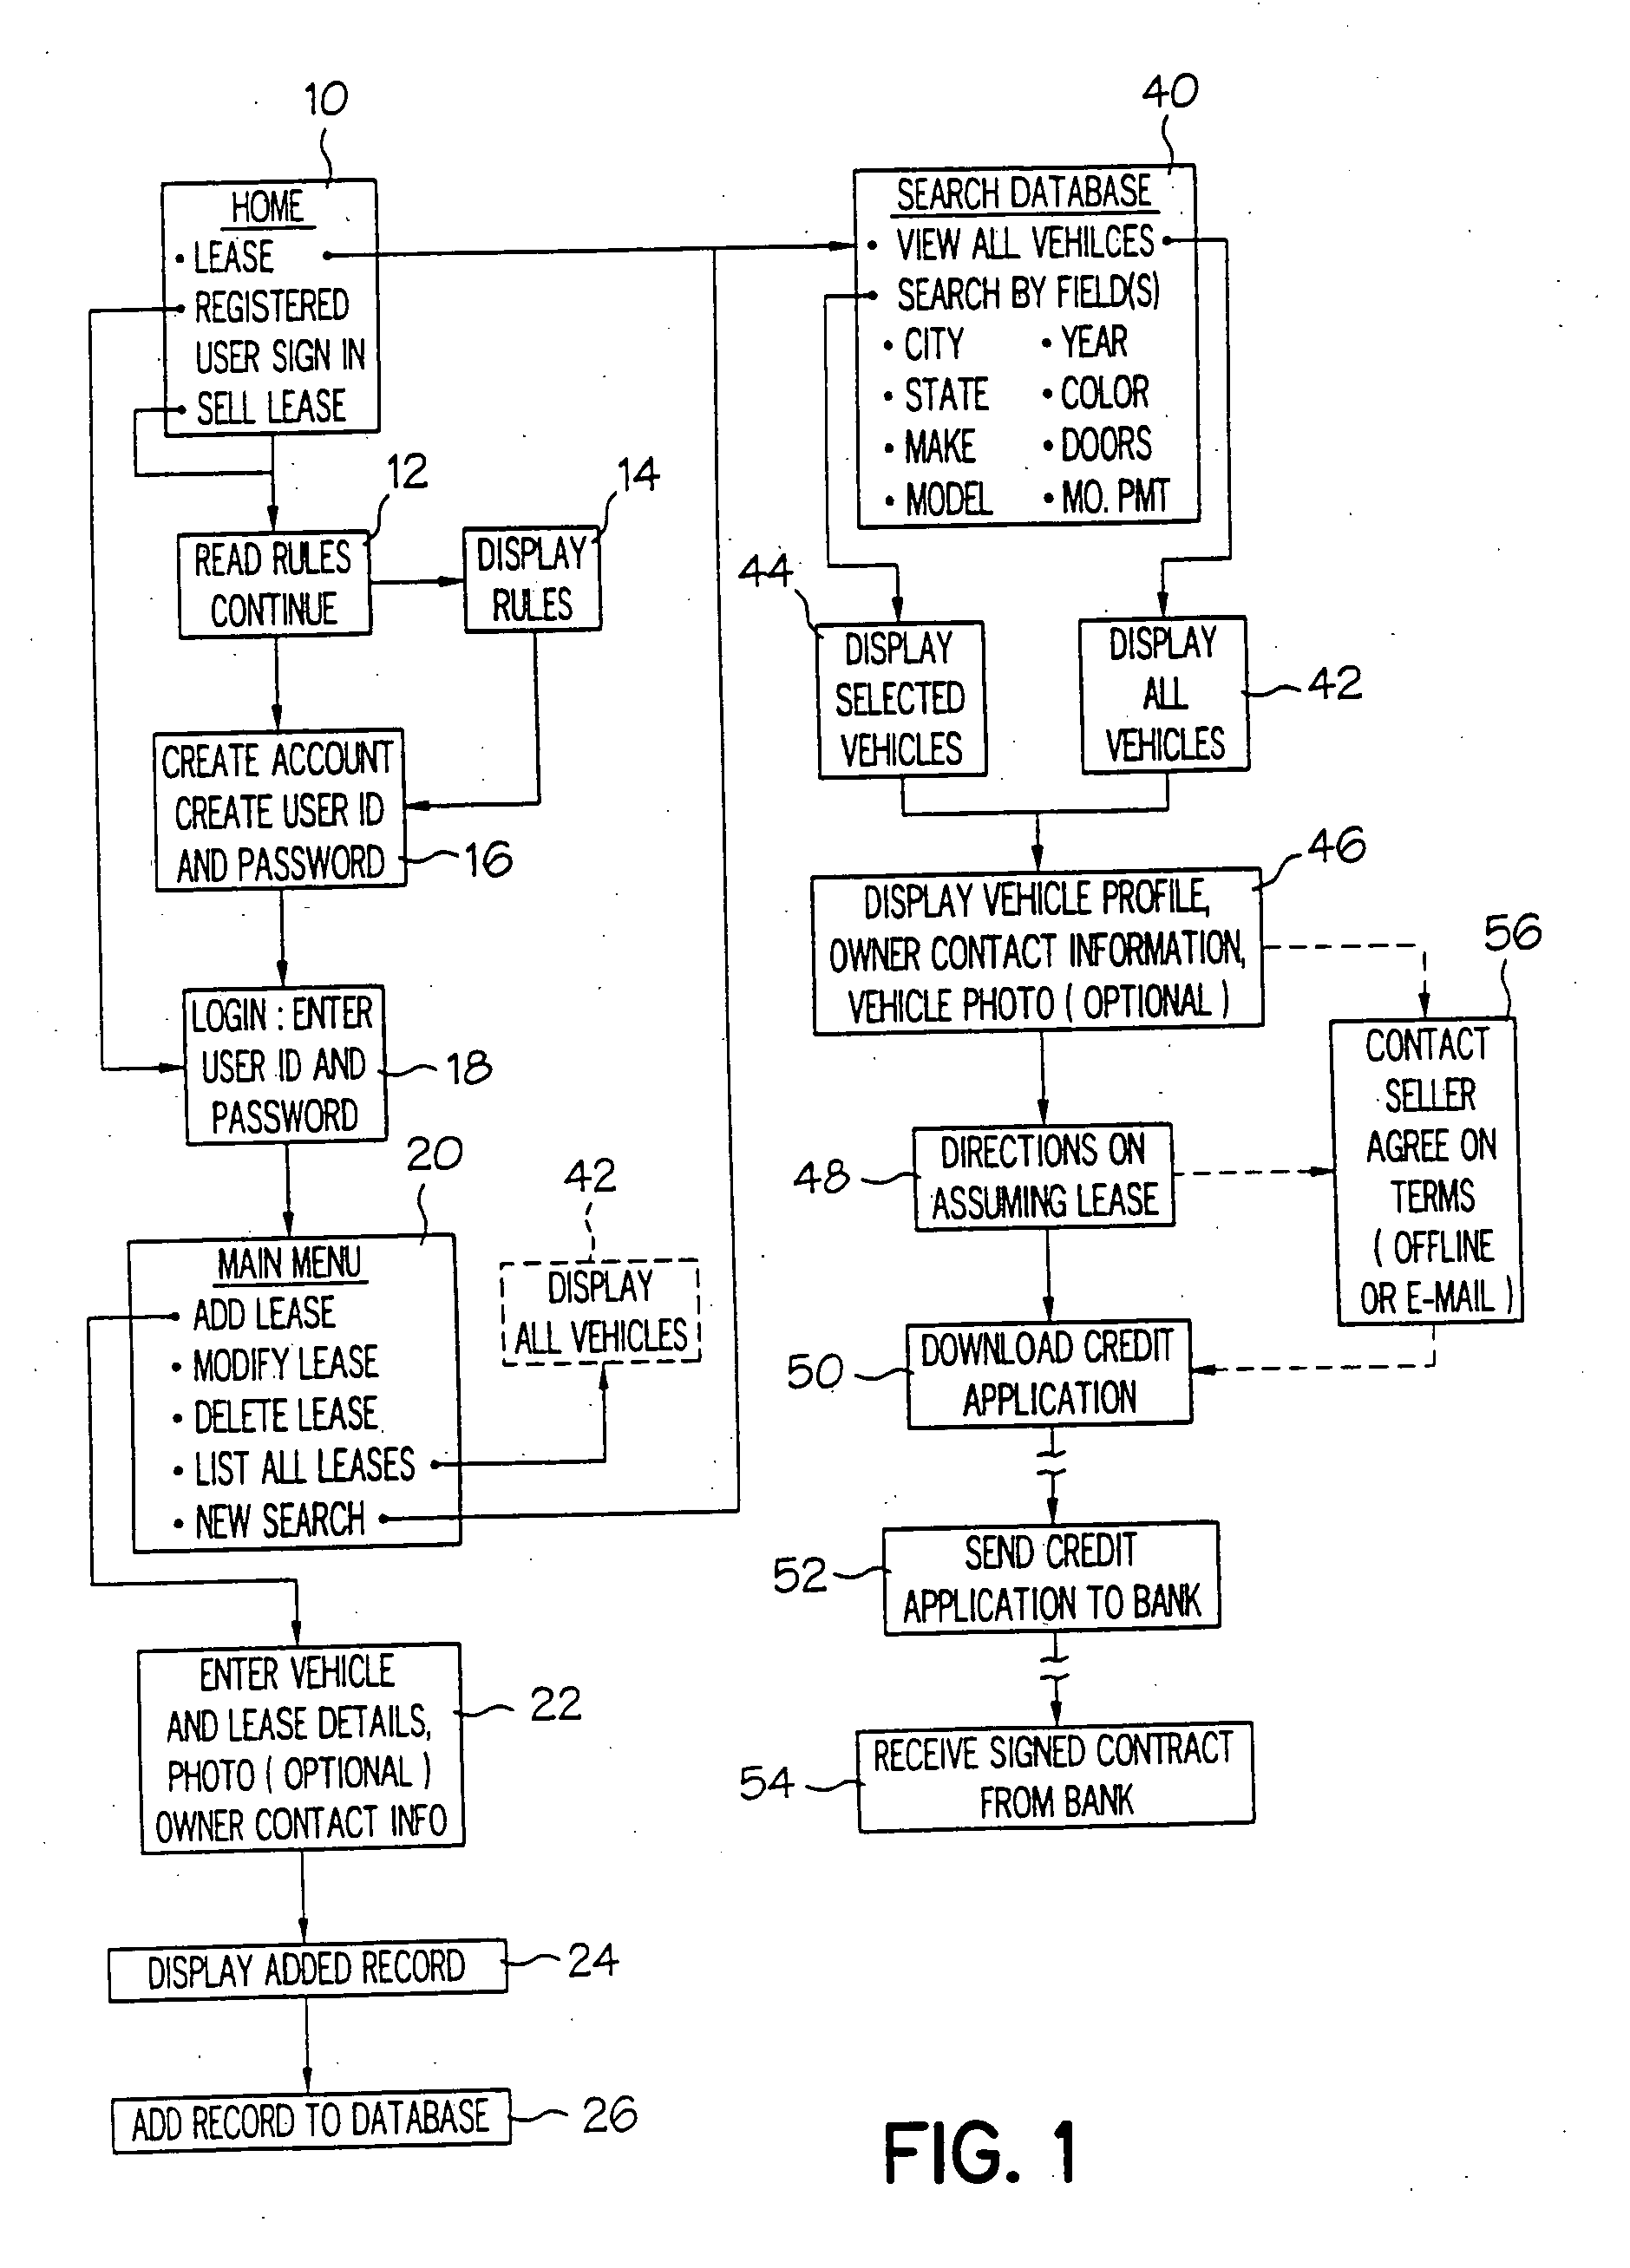 Method, apparatus and program product for facilitating transfer of vehicle leases